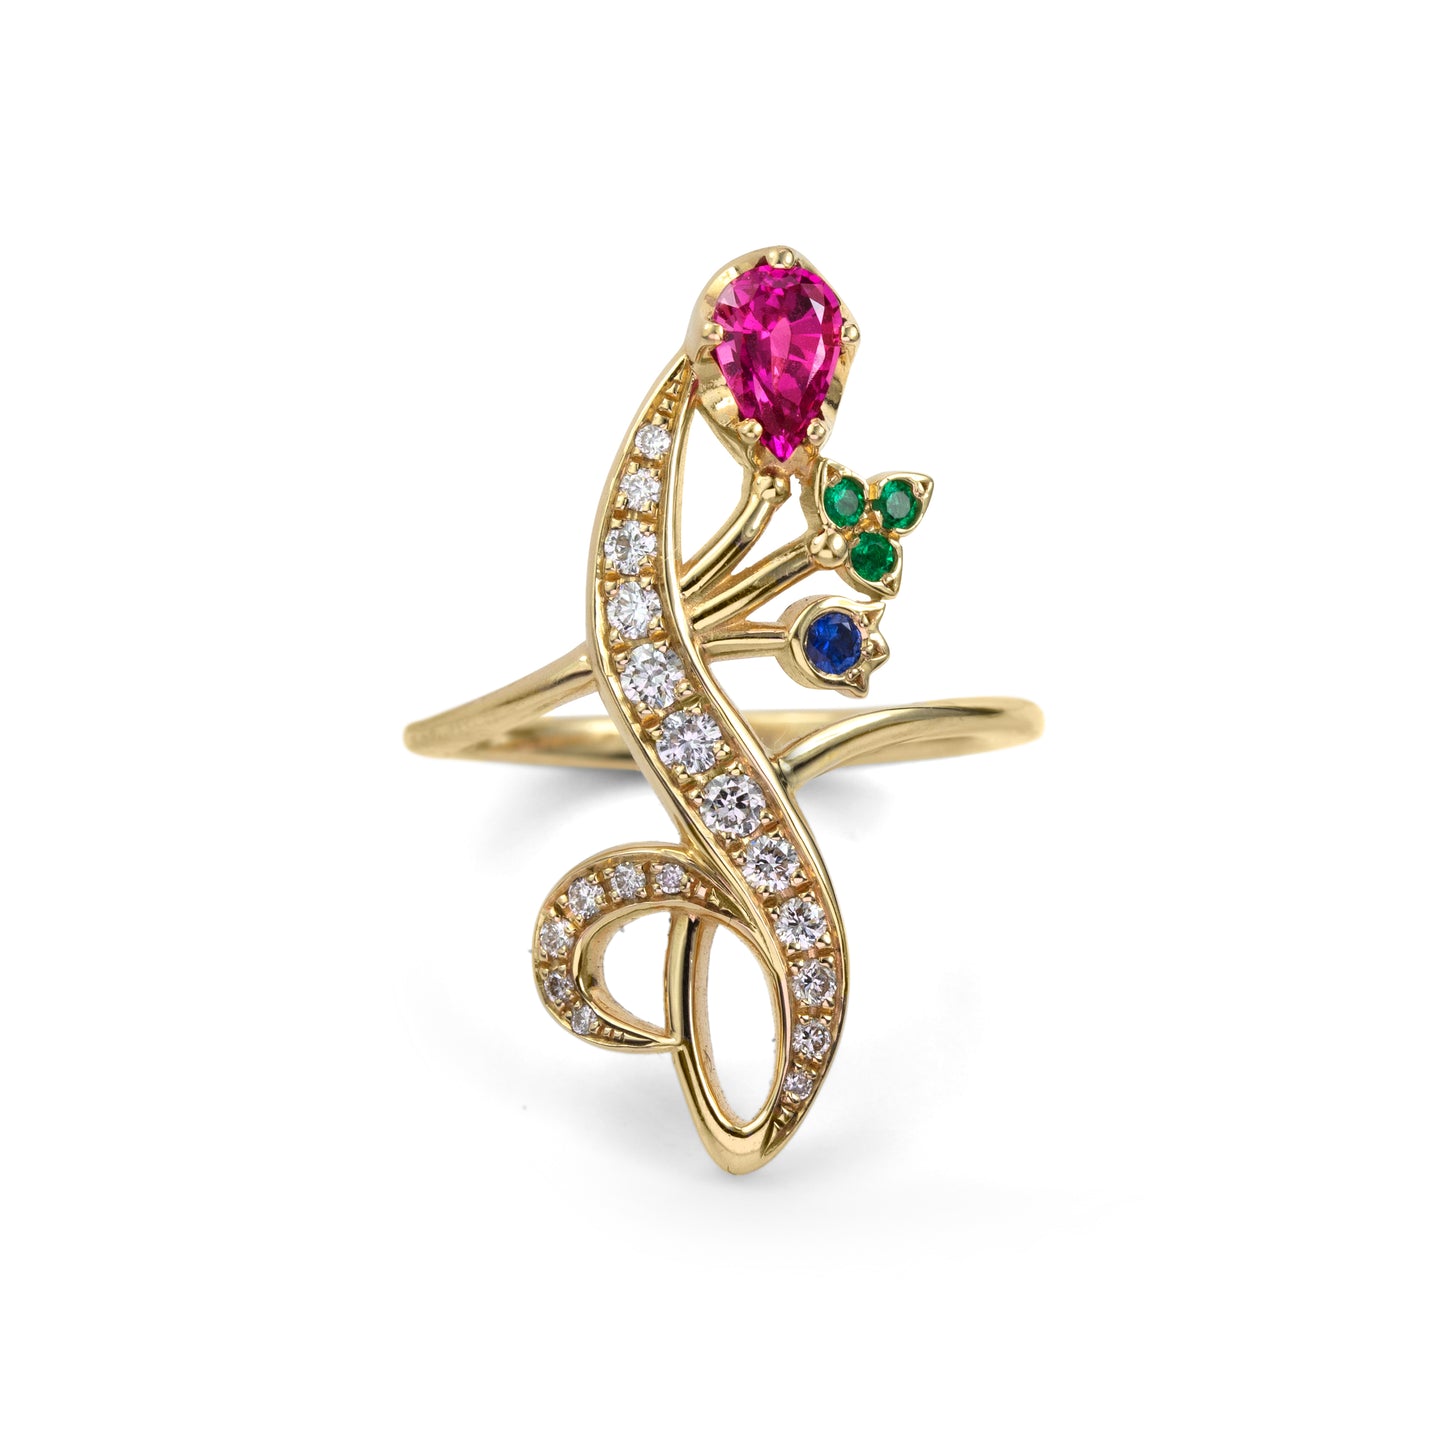 Fancy yellow gold and gemstone giardinetti style  ring with curving diamond set leaf design and multi gem pink sapphire, emerald and blue sapphire  flower accents.